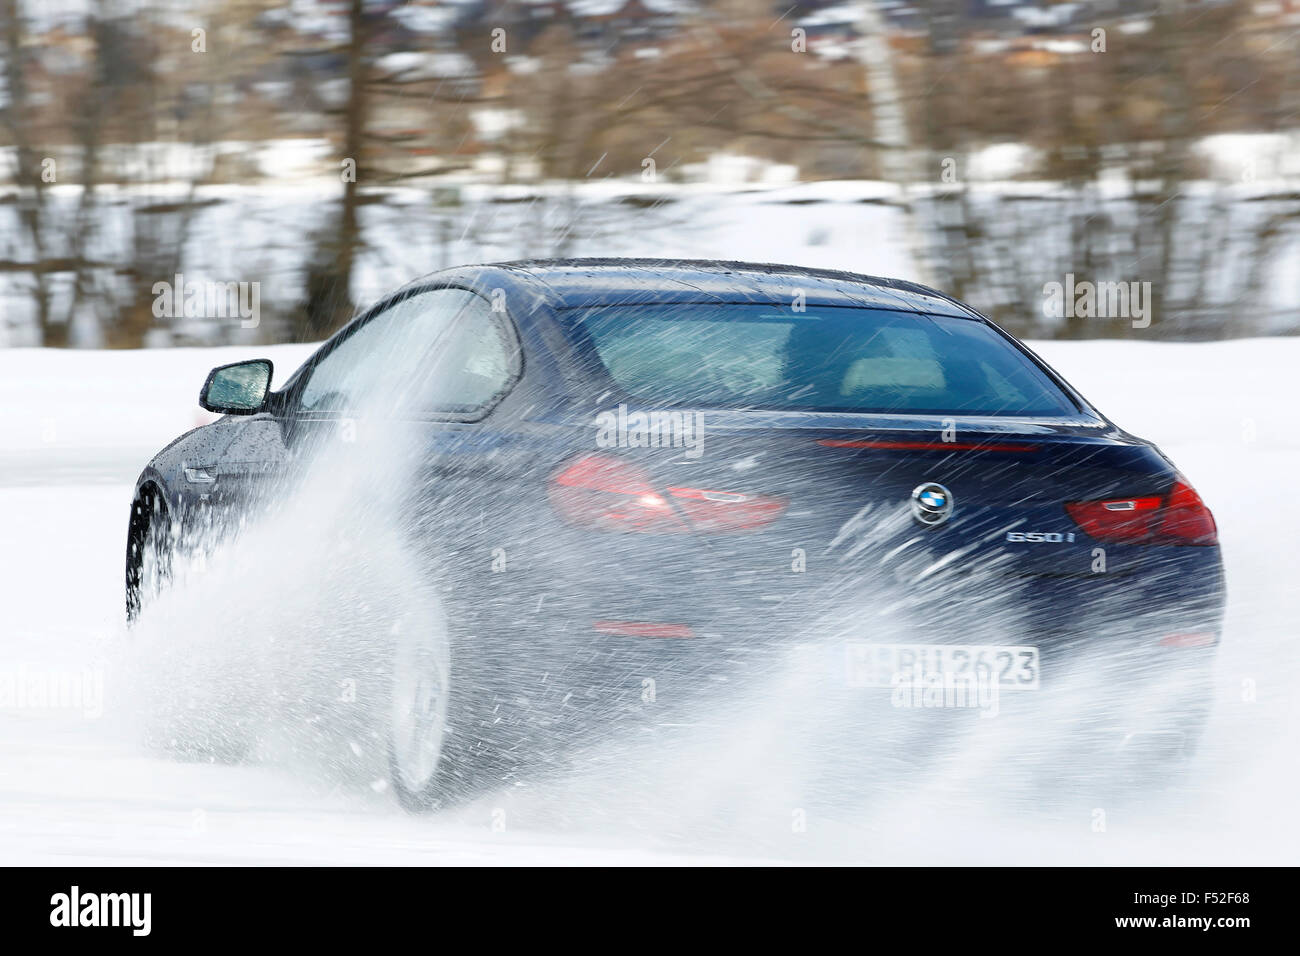 Car, BMW 650 i four-wheel, year of construction in 2012, on ice and snow in drift, Stock Photo